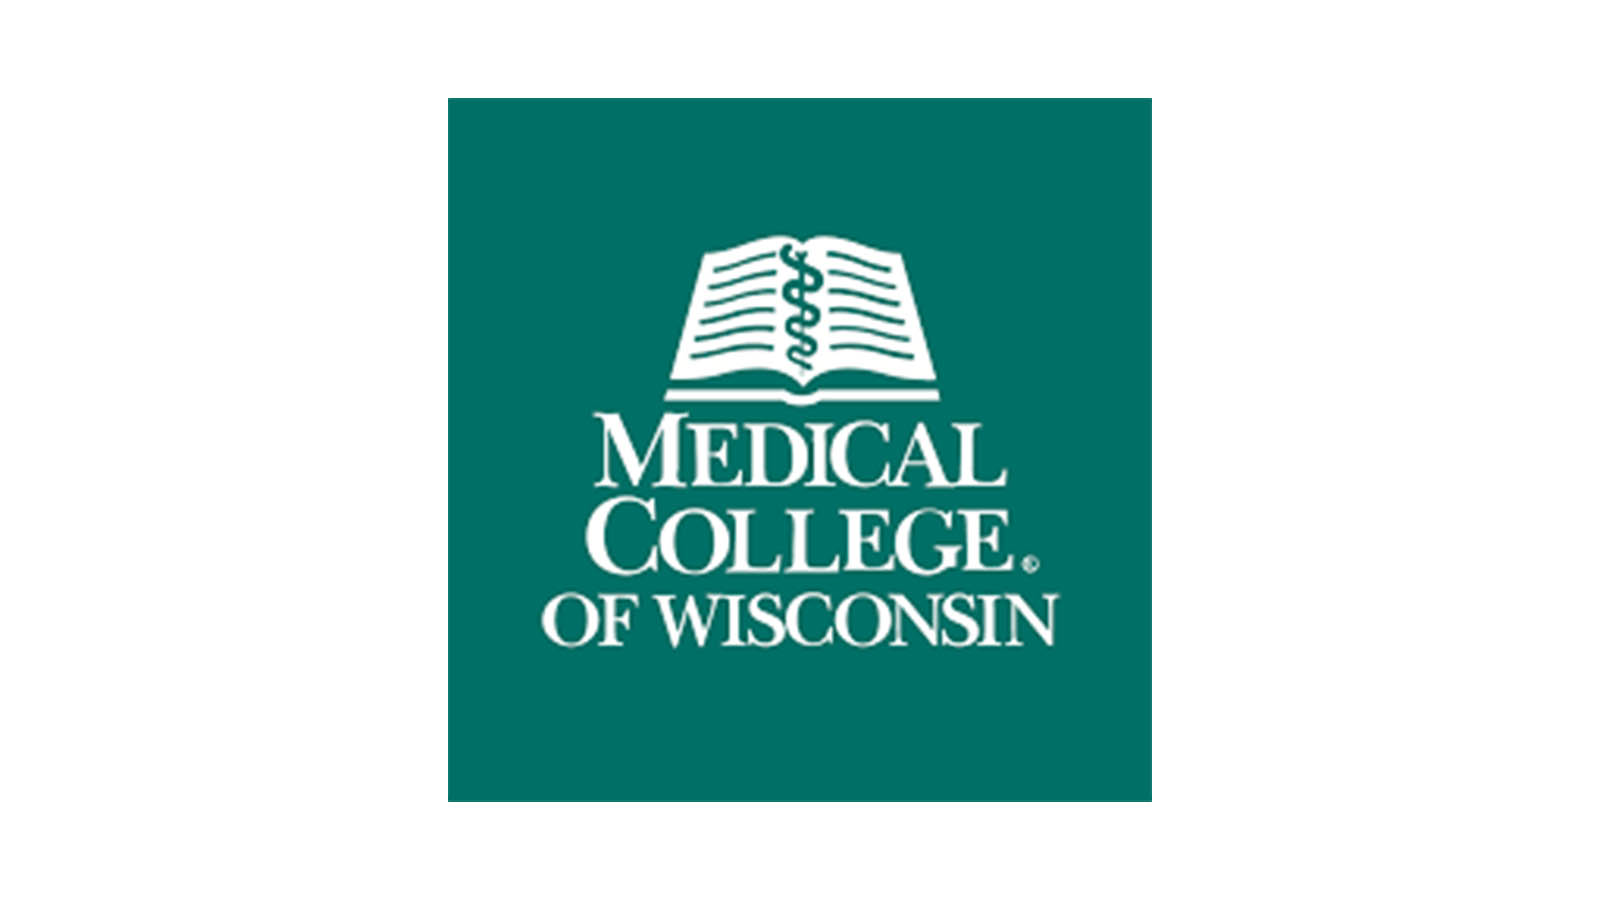 medical college of wisconsin logo